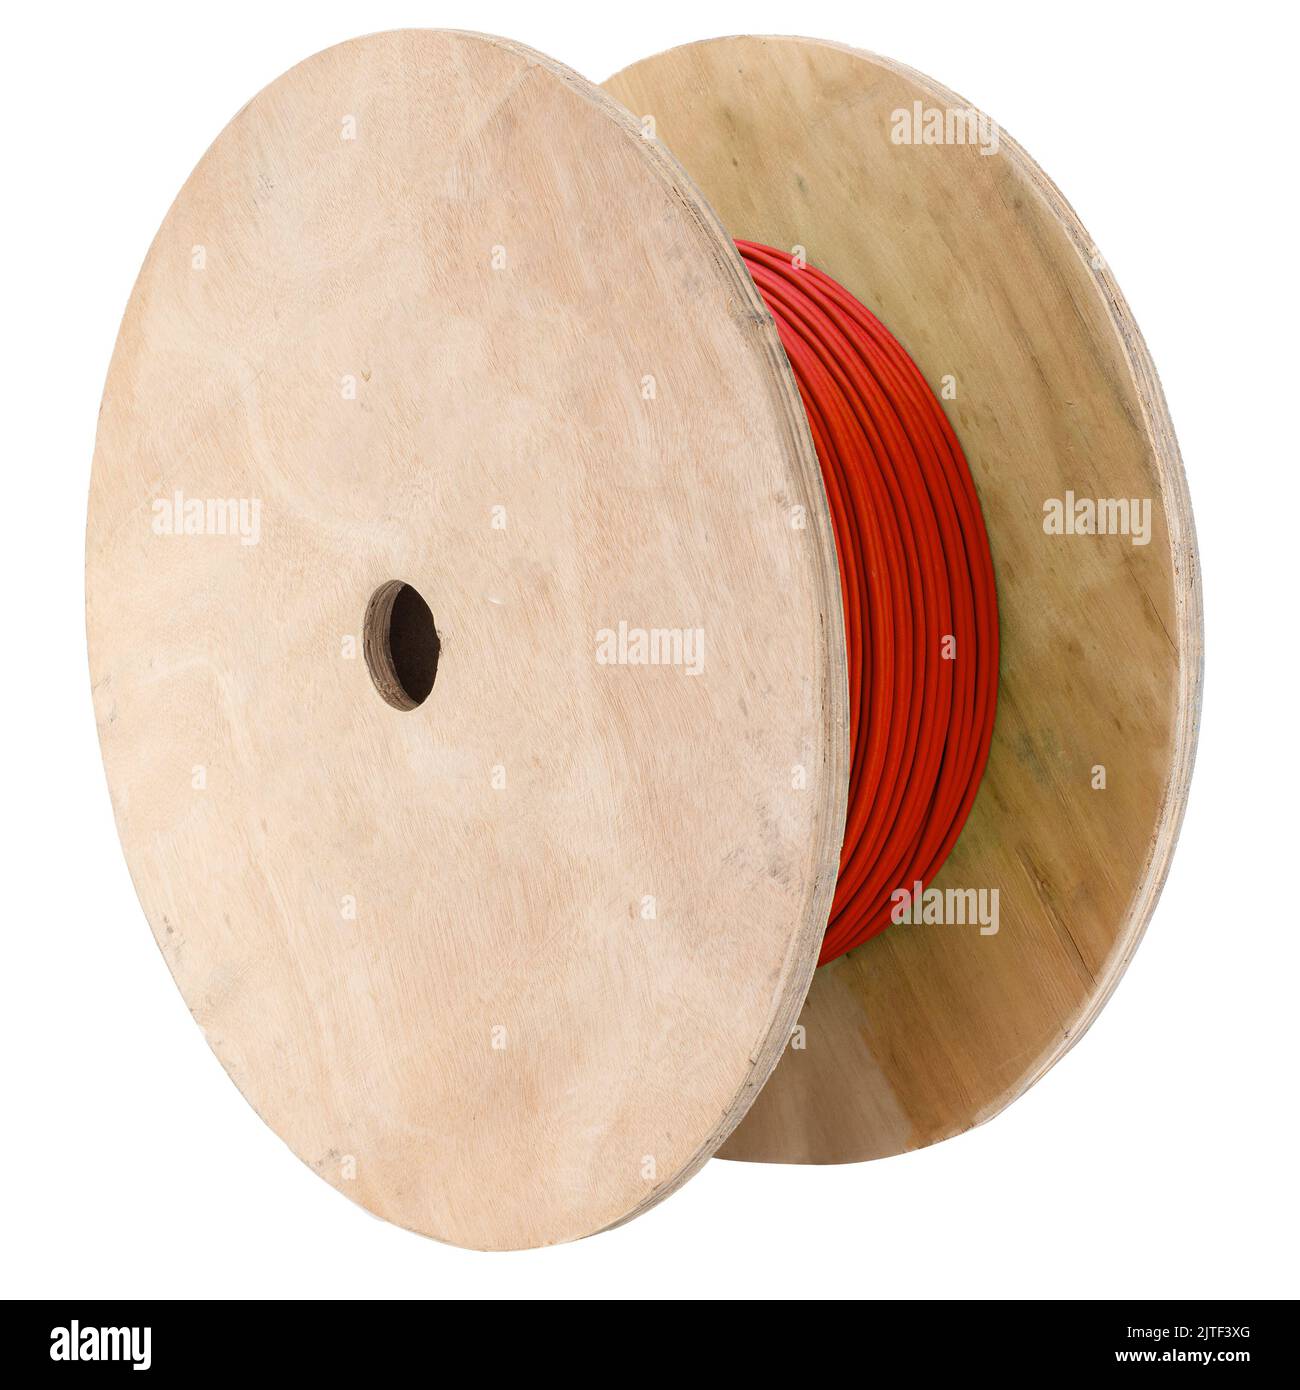 Drums of cable Cut Out Stock Images & Pictures - Alamy